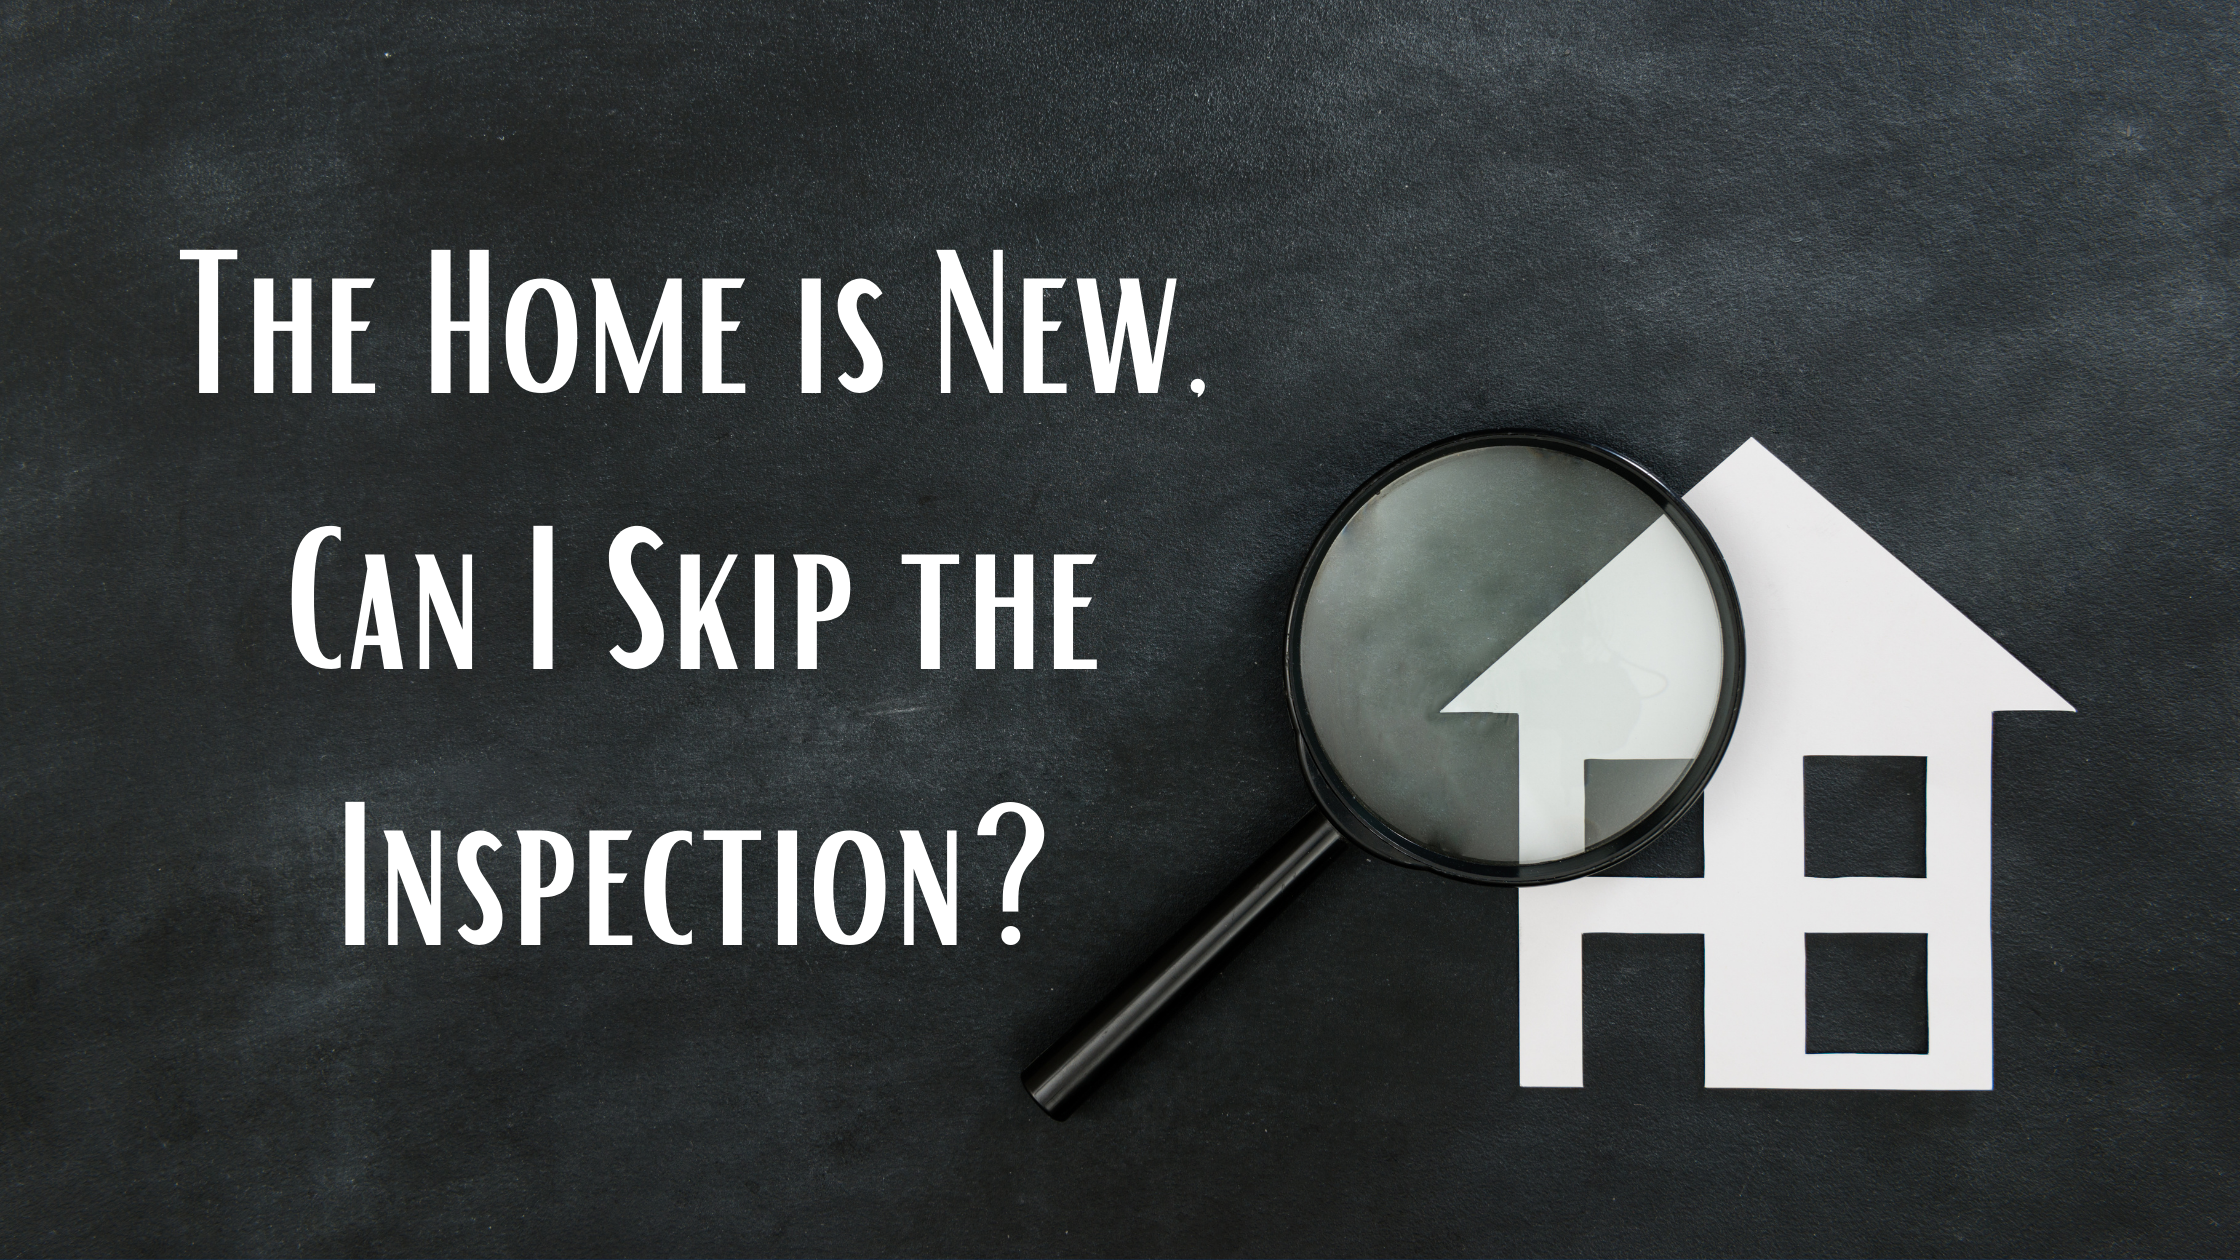 The House is New, Can I Skip the Home Inspection?